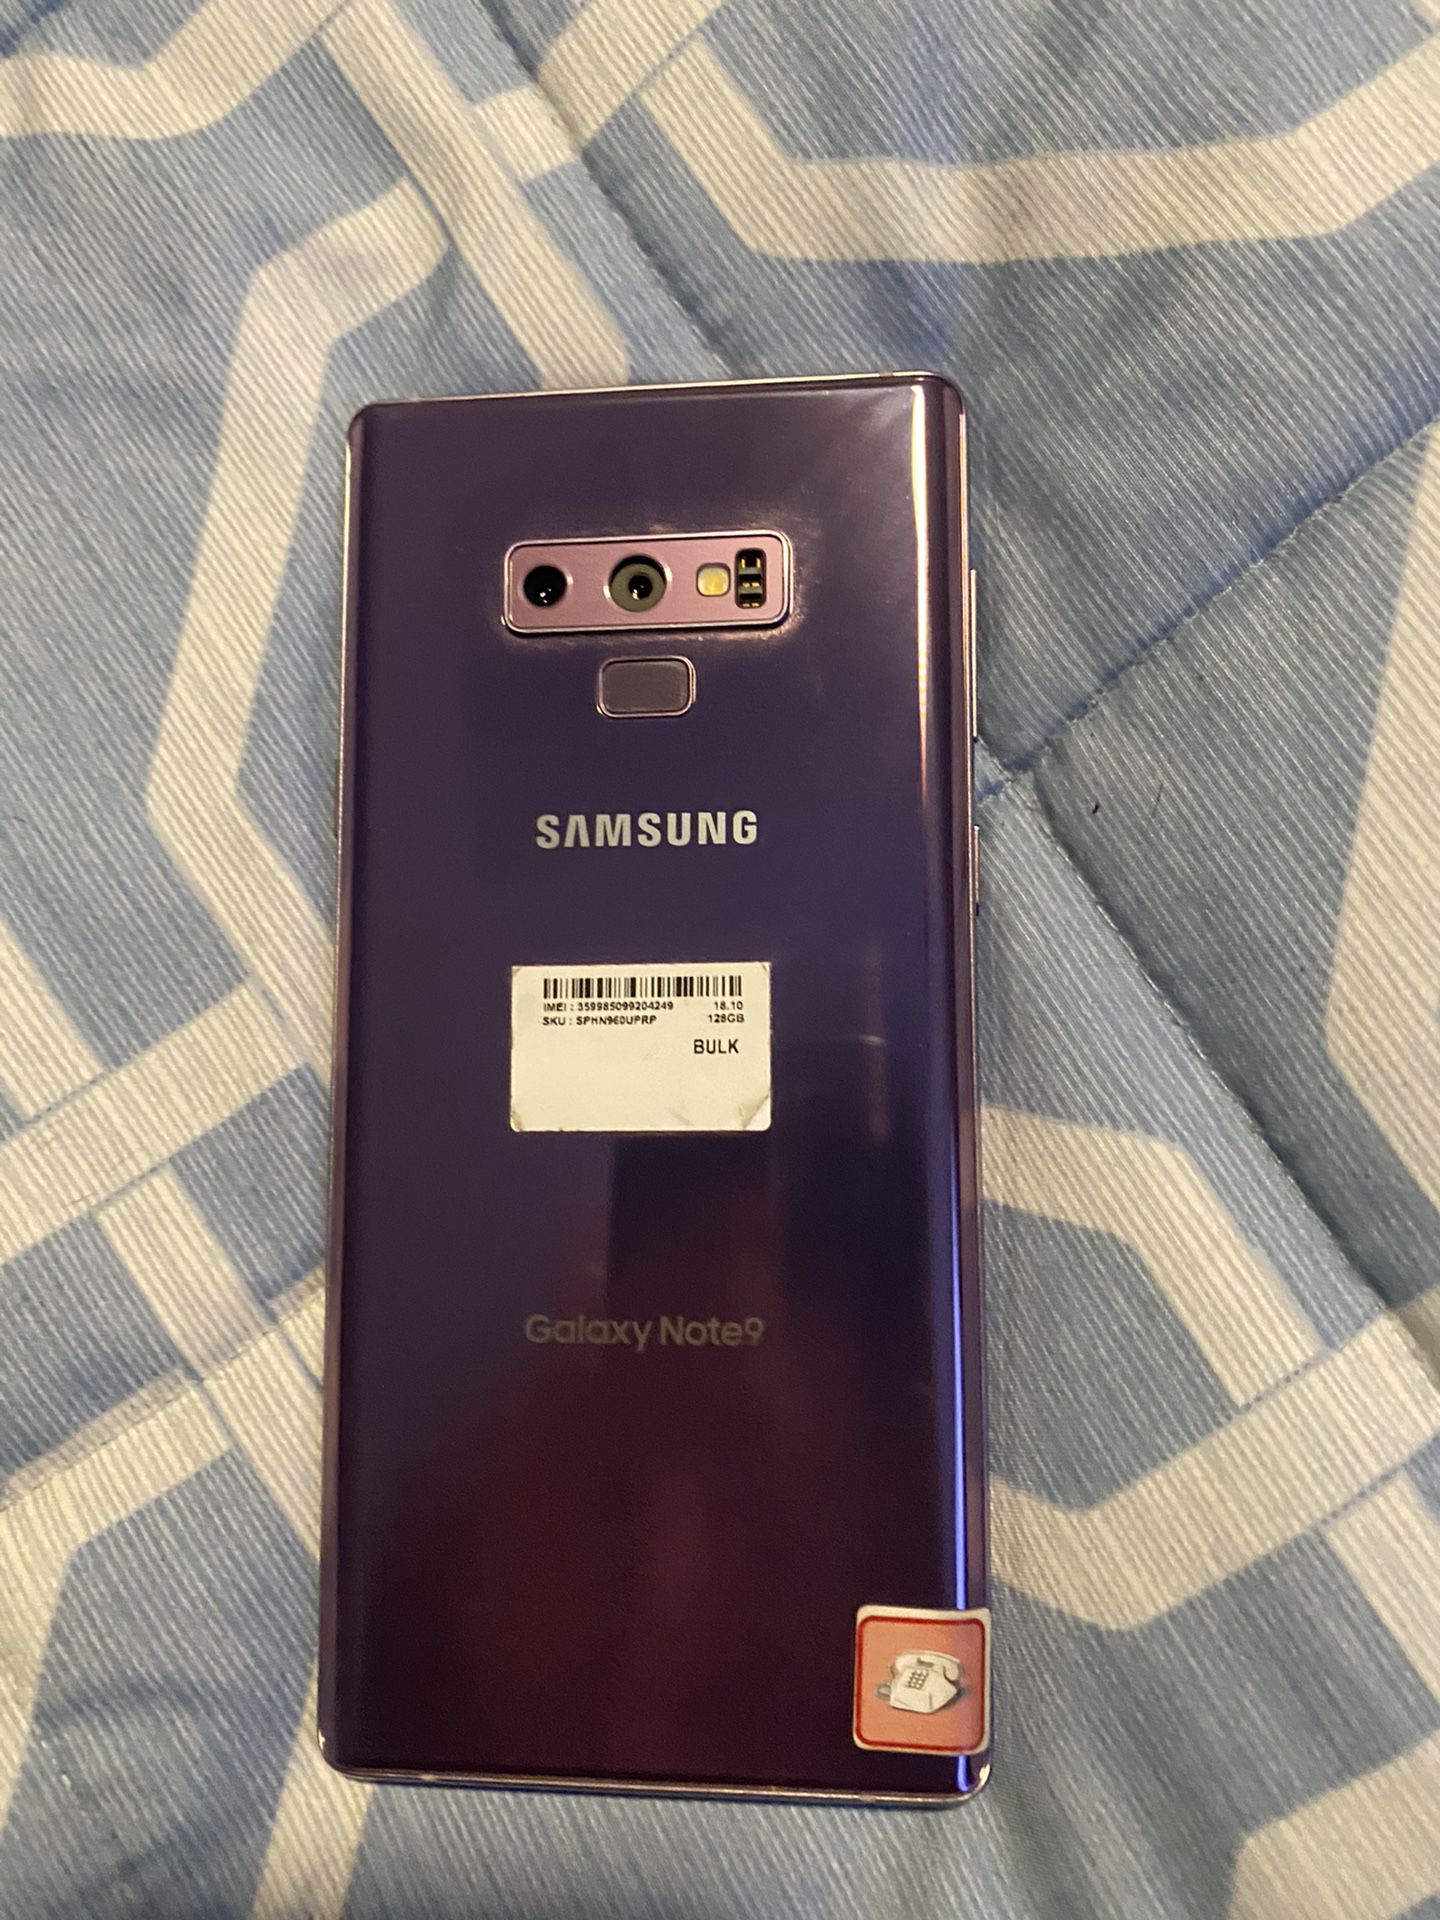 Unlocked Samsung Galaxy Note 9 like new perfect condition.